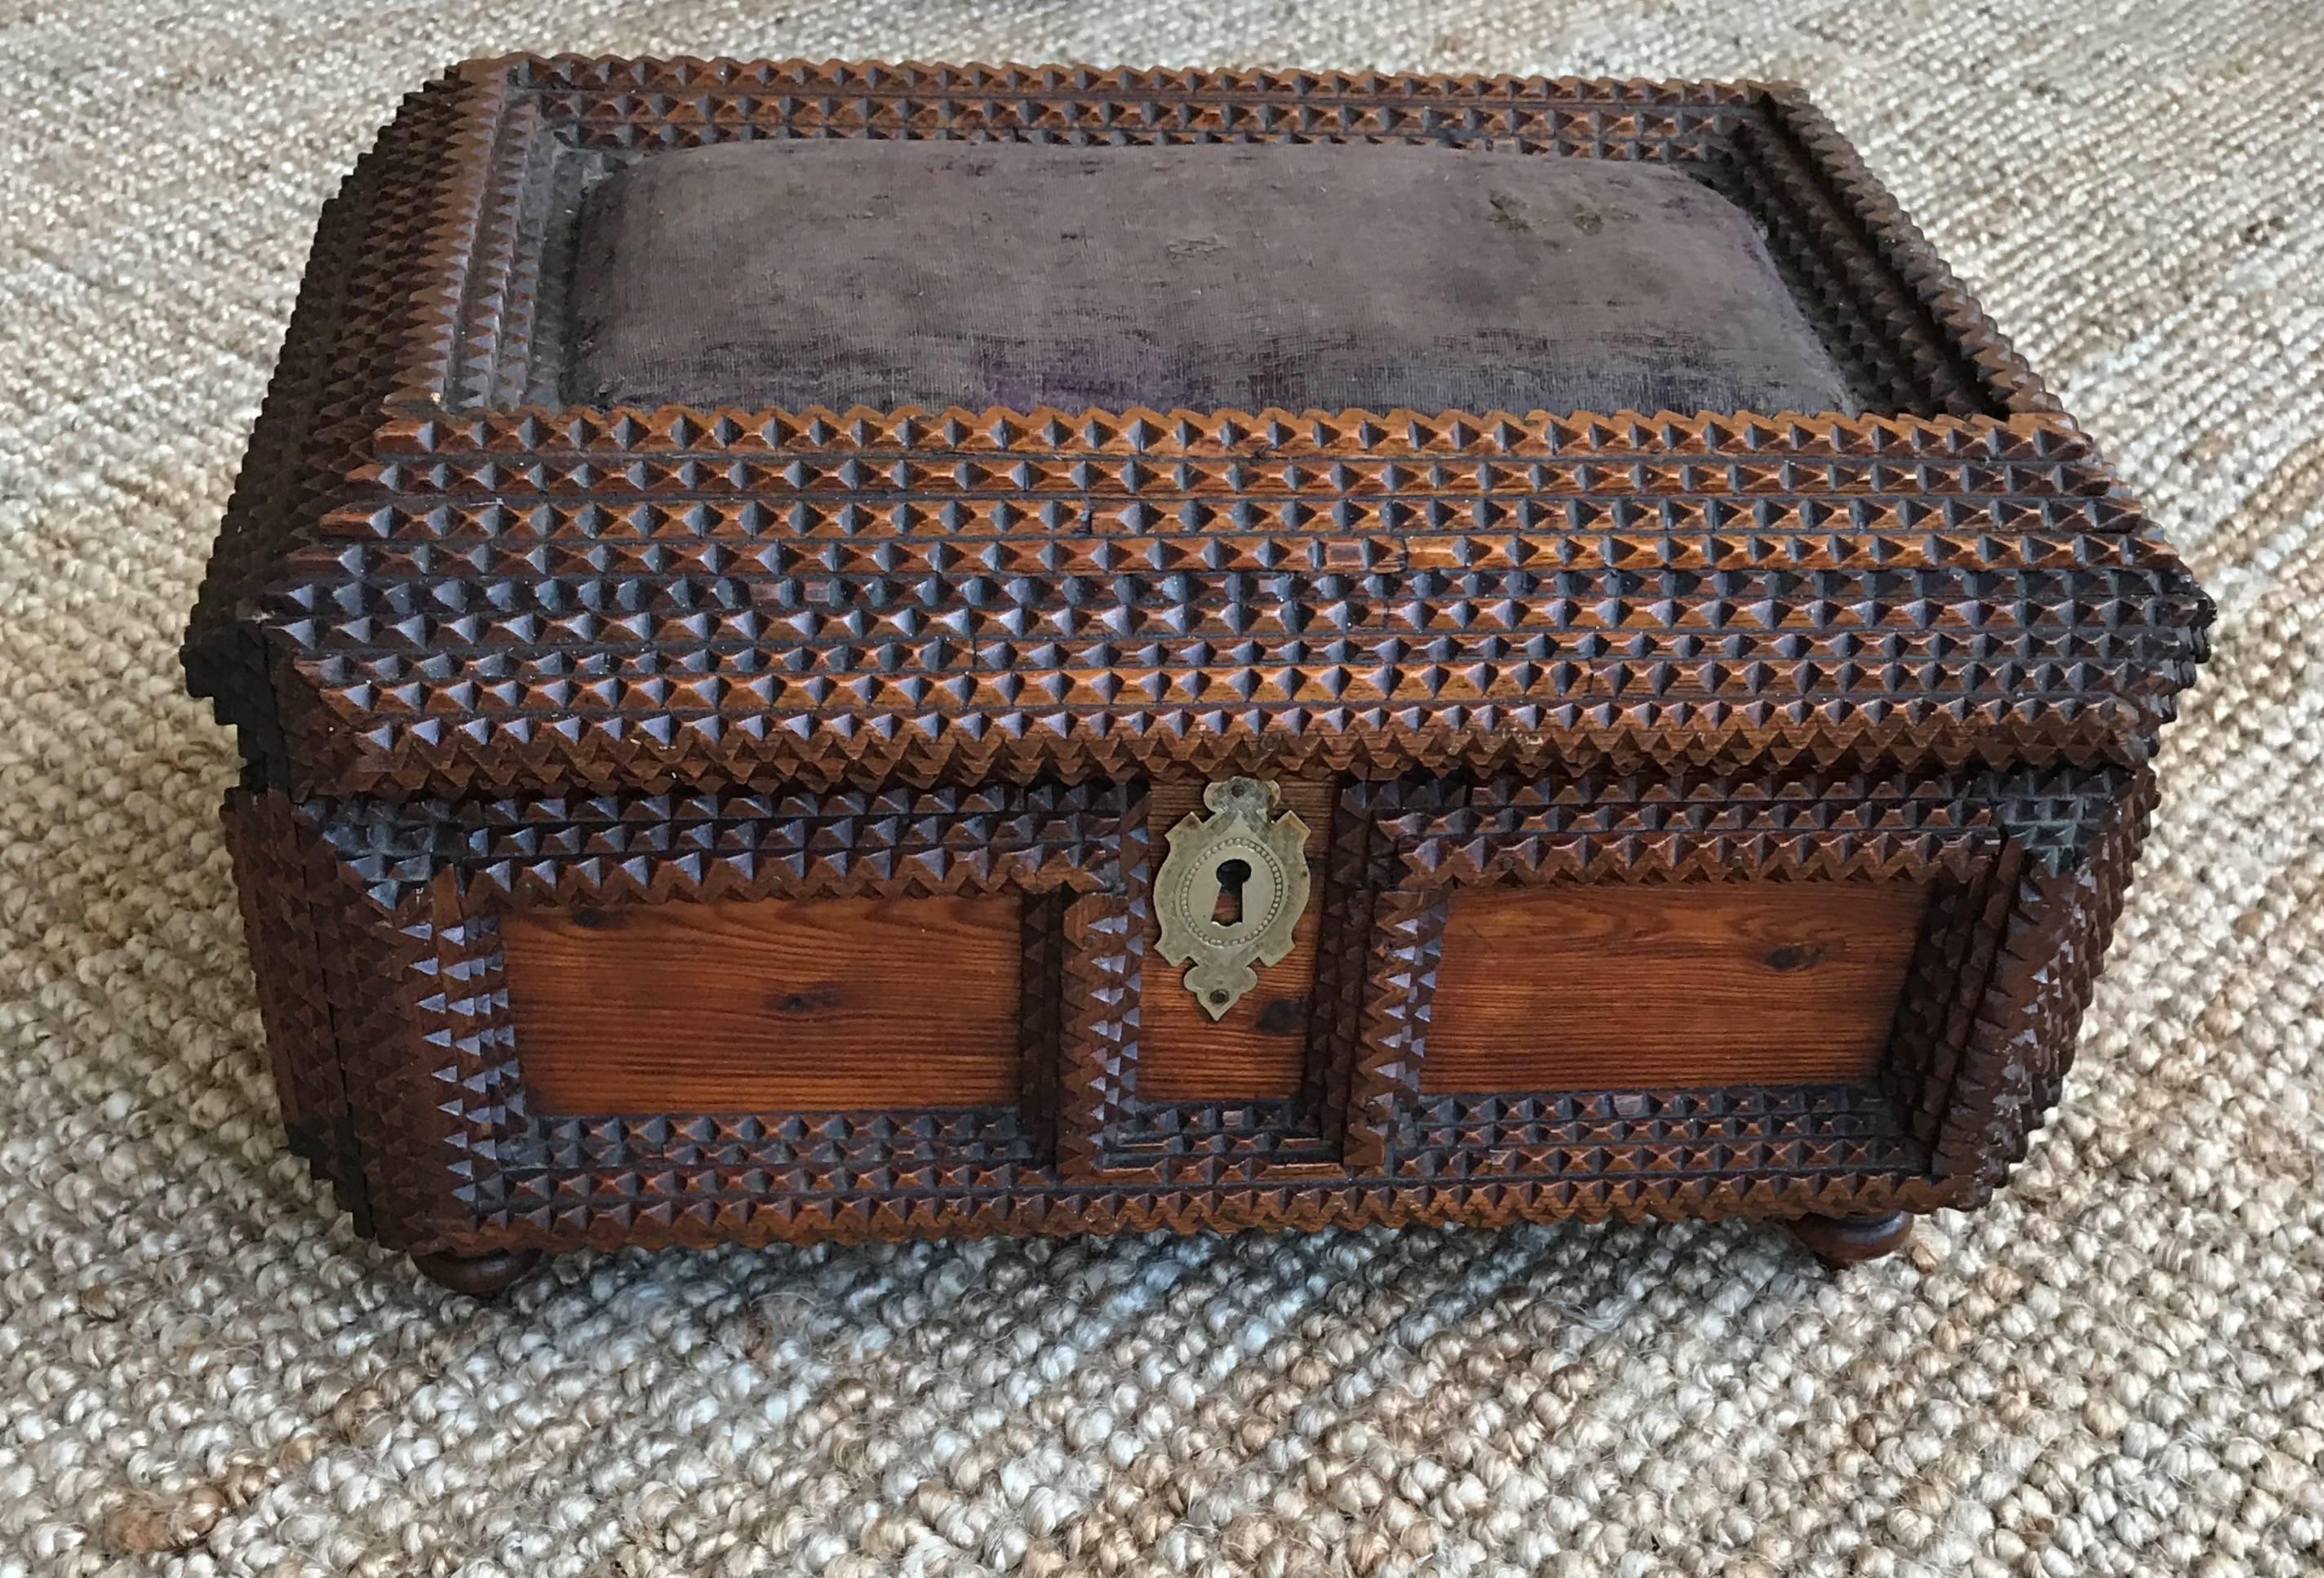 Good size, late 19th century folk art box.

This handcrafted tramp art box is covered with geometric designs creating alternating depths on all sides. This beautiful example dates from circa 1880 and can be used for all kinds of purposes. The color